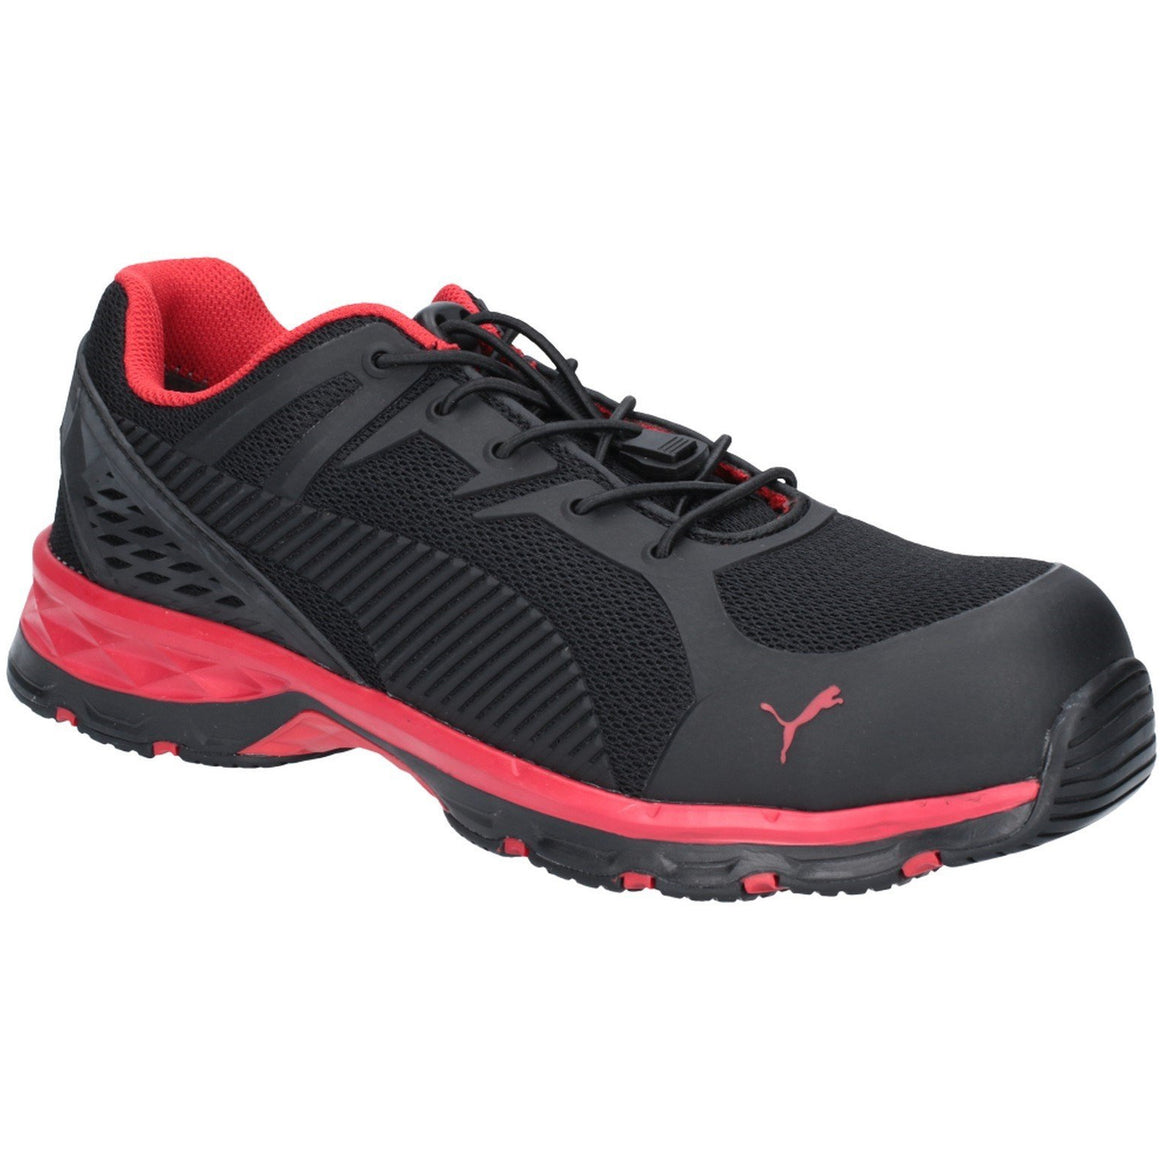 Puma Fuse Motion 2.0 Safety Trainer with Composite Toe Cap | Work & Safety